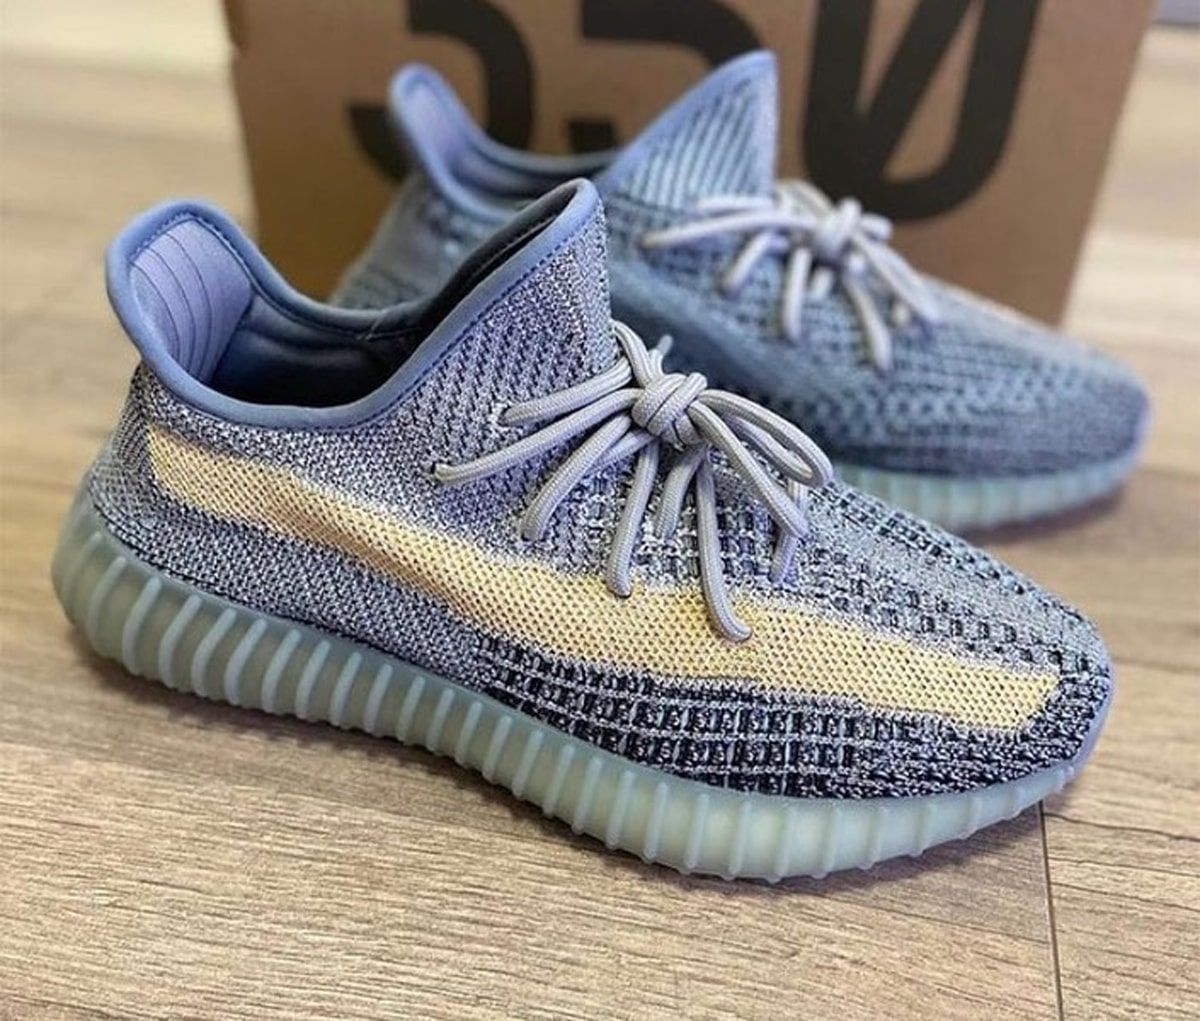 yeezy shoes release date 218